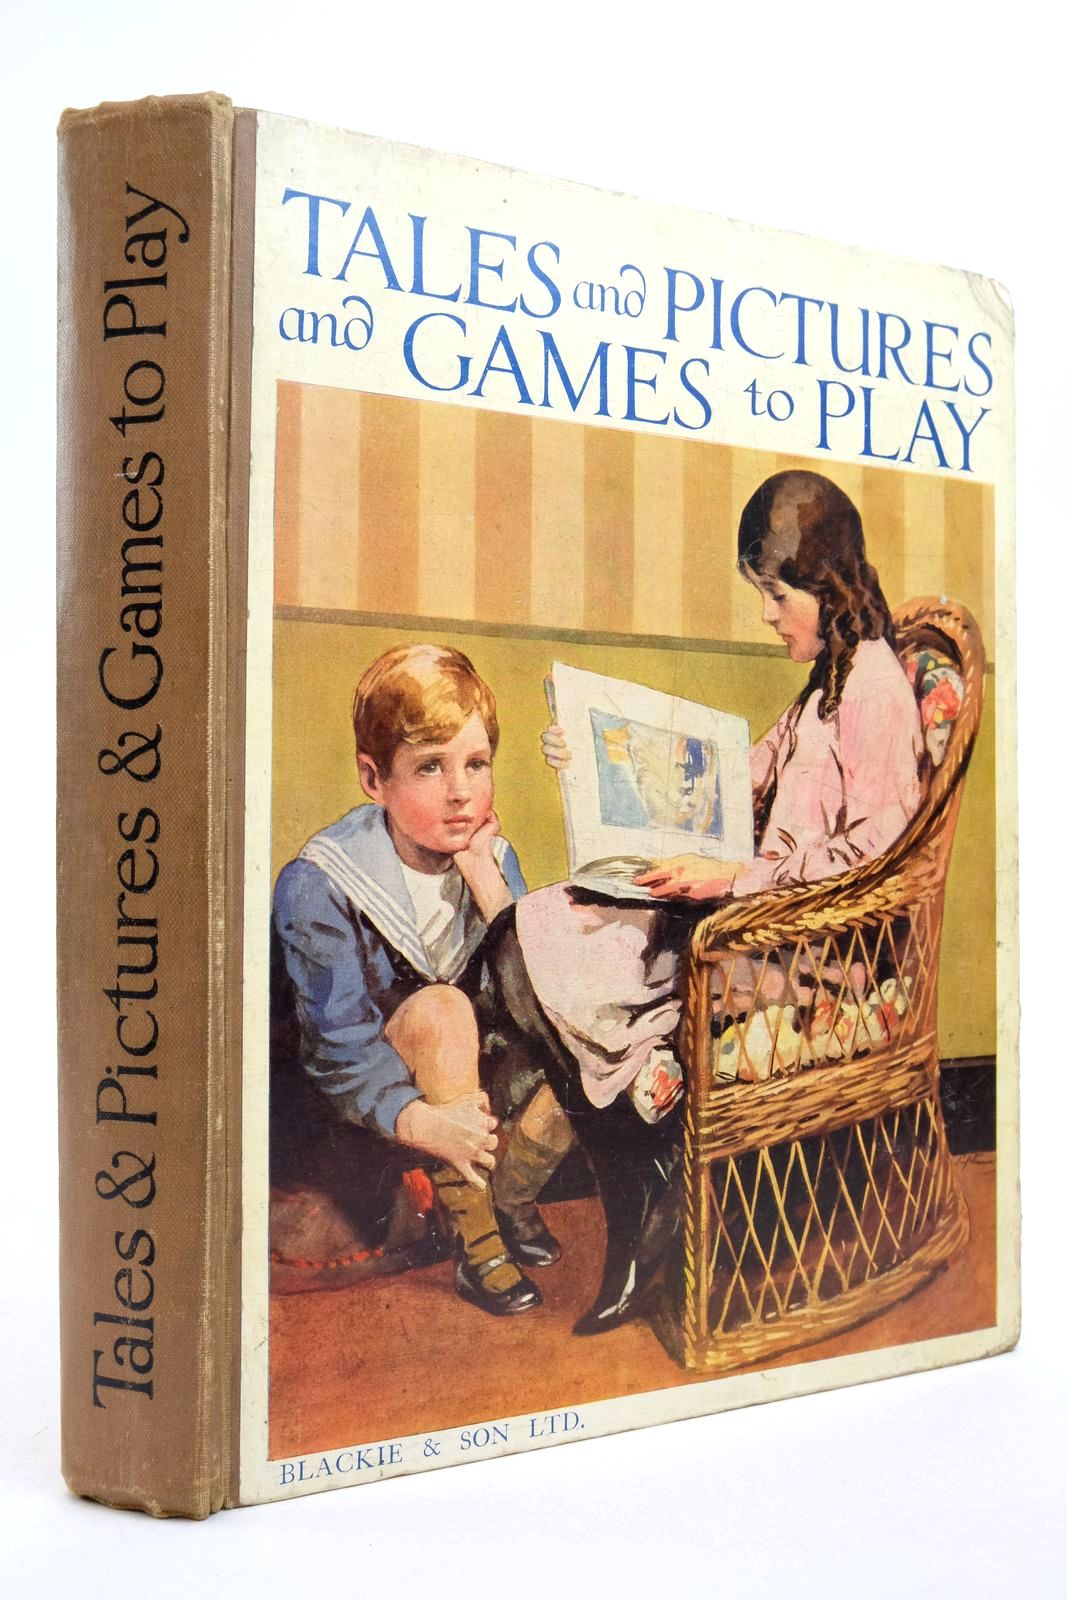 Photo of TALES AND PICTURES AND GAMES TO PLAY illustrated by Lambert, H.G.C. Marsh Earnshaw, Harold Adams, Frank Woolley, Harry et al., published by Blackie &amp; Son Ltd. (STOCK CODE: 2138749)  for sale by Stella & Rose's Books